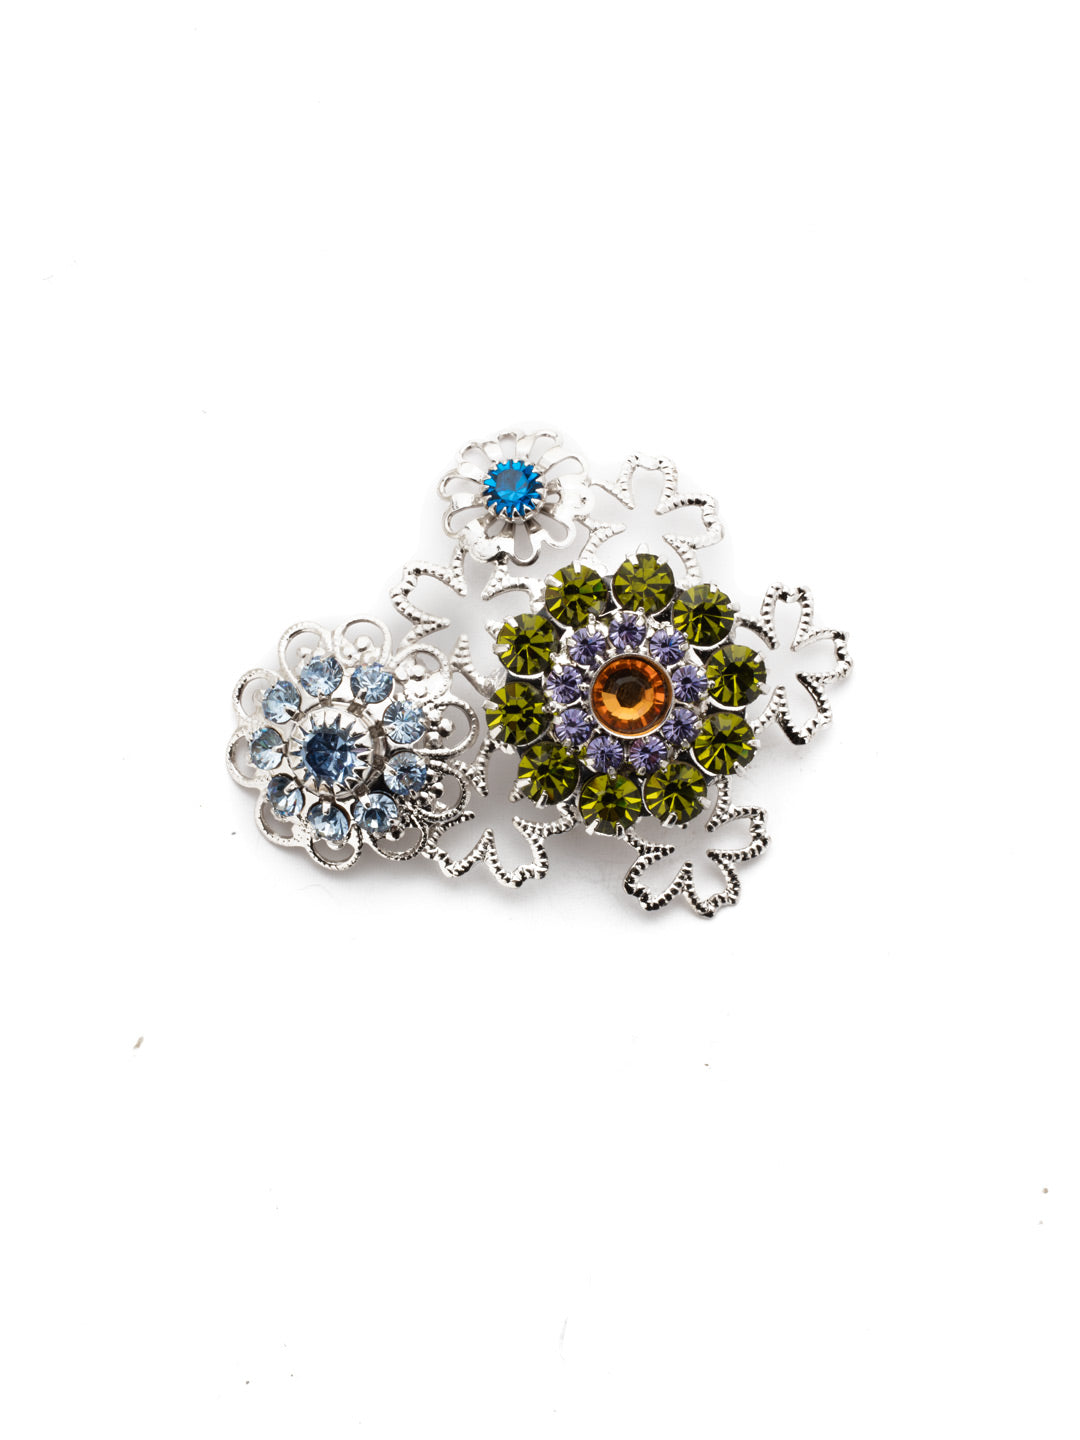 Edith Magnetic Charm - CHM2RHMUL - <p>Designed with ornate filagree detail and a colorful array of crystals. This multi-functional accessory charm embellishment can be used to decorate, your bag, blazer, dress or refrigerator. Securely fastening with a magnet, leaving no pin holes or damage to fabric. Promptly remove charm embellishment from clothing, bag or accessory before washing. From Sorrelli's Multi  collection in our Palladium Silver-tone finish.</p>